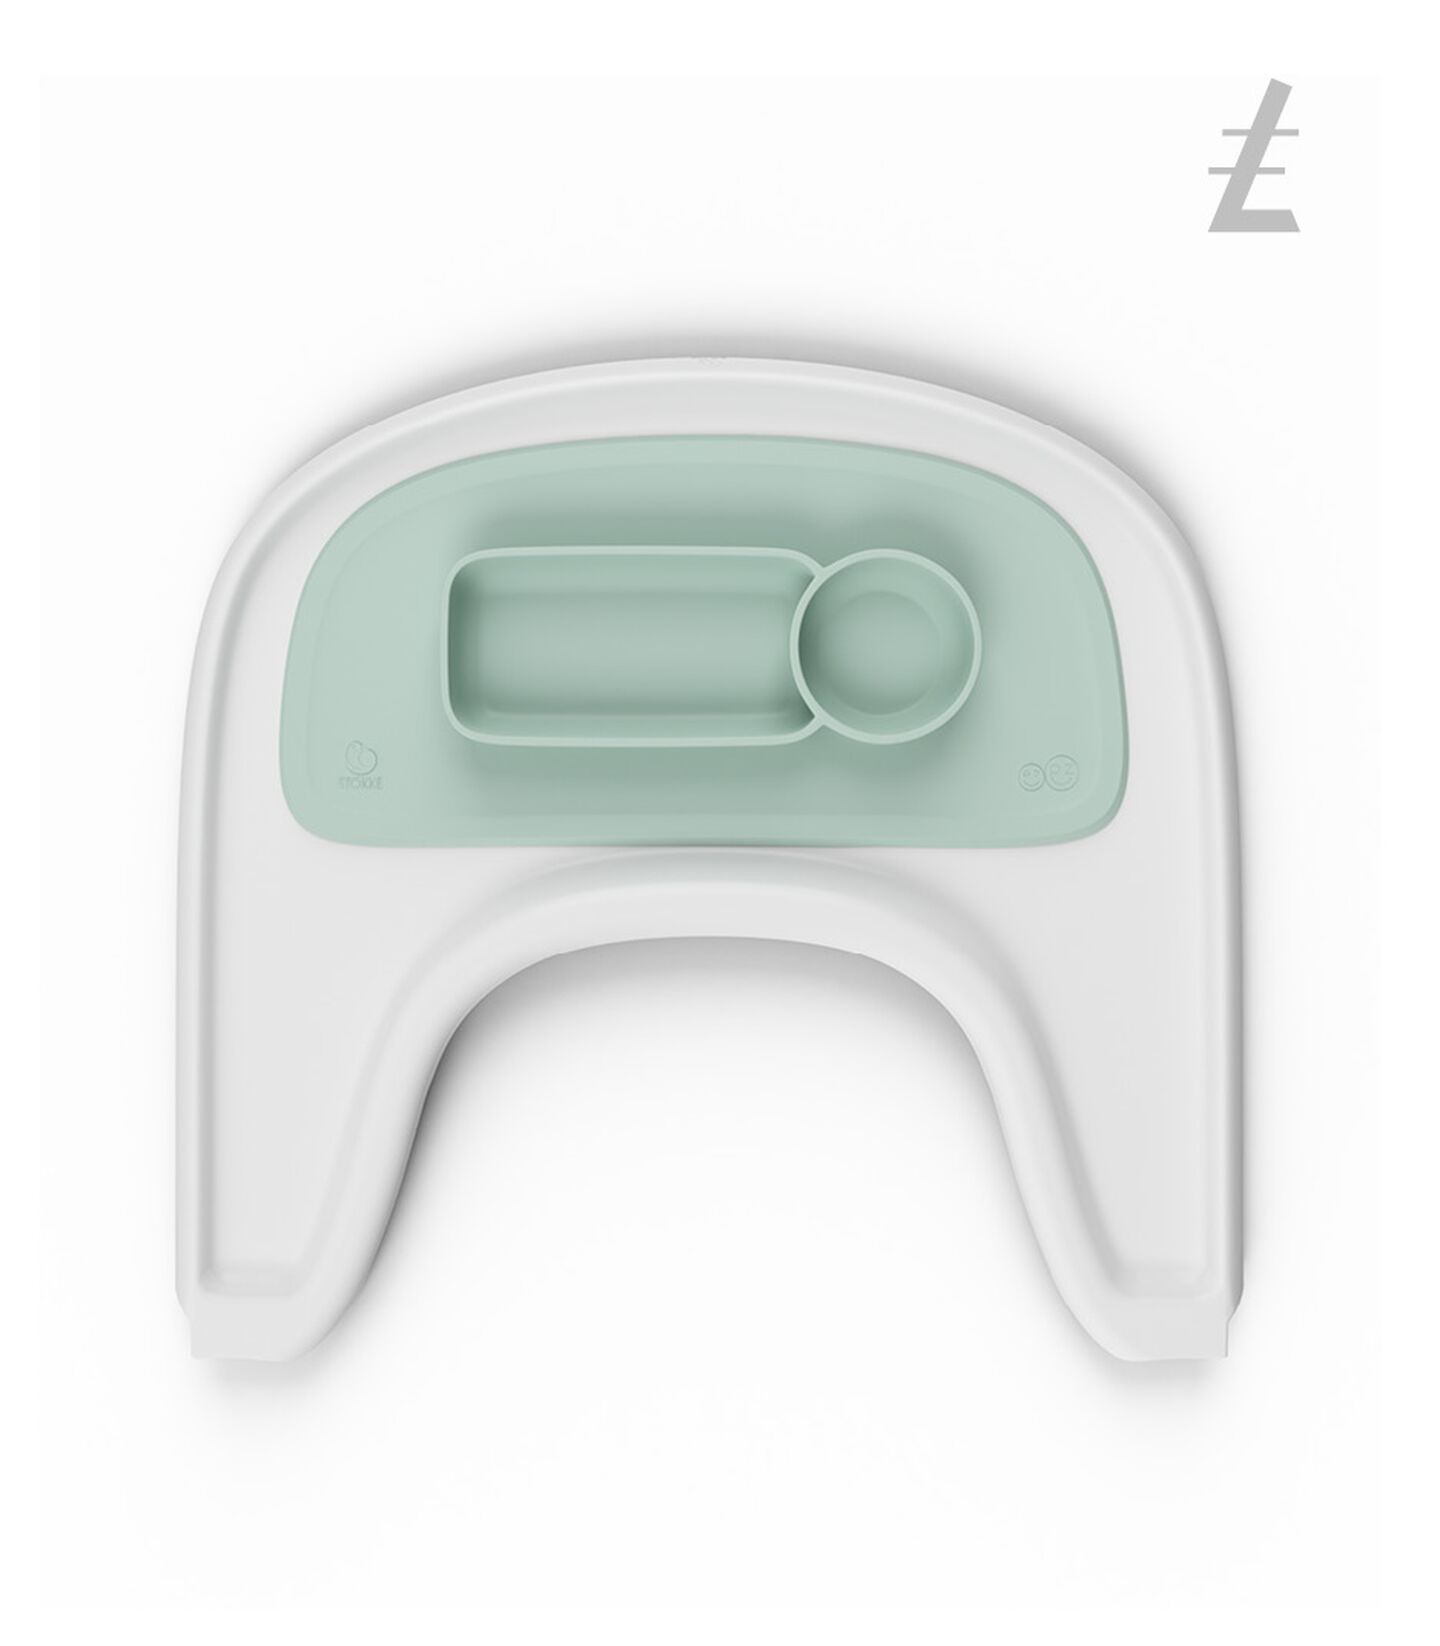 ezpz™ by Stokke™ placemat for Stokke® Tray Soft Mint, Soft Mint, mainview view 3